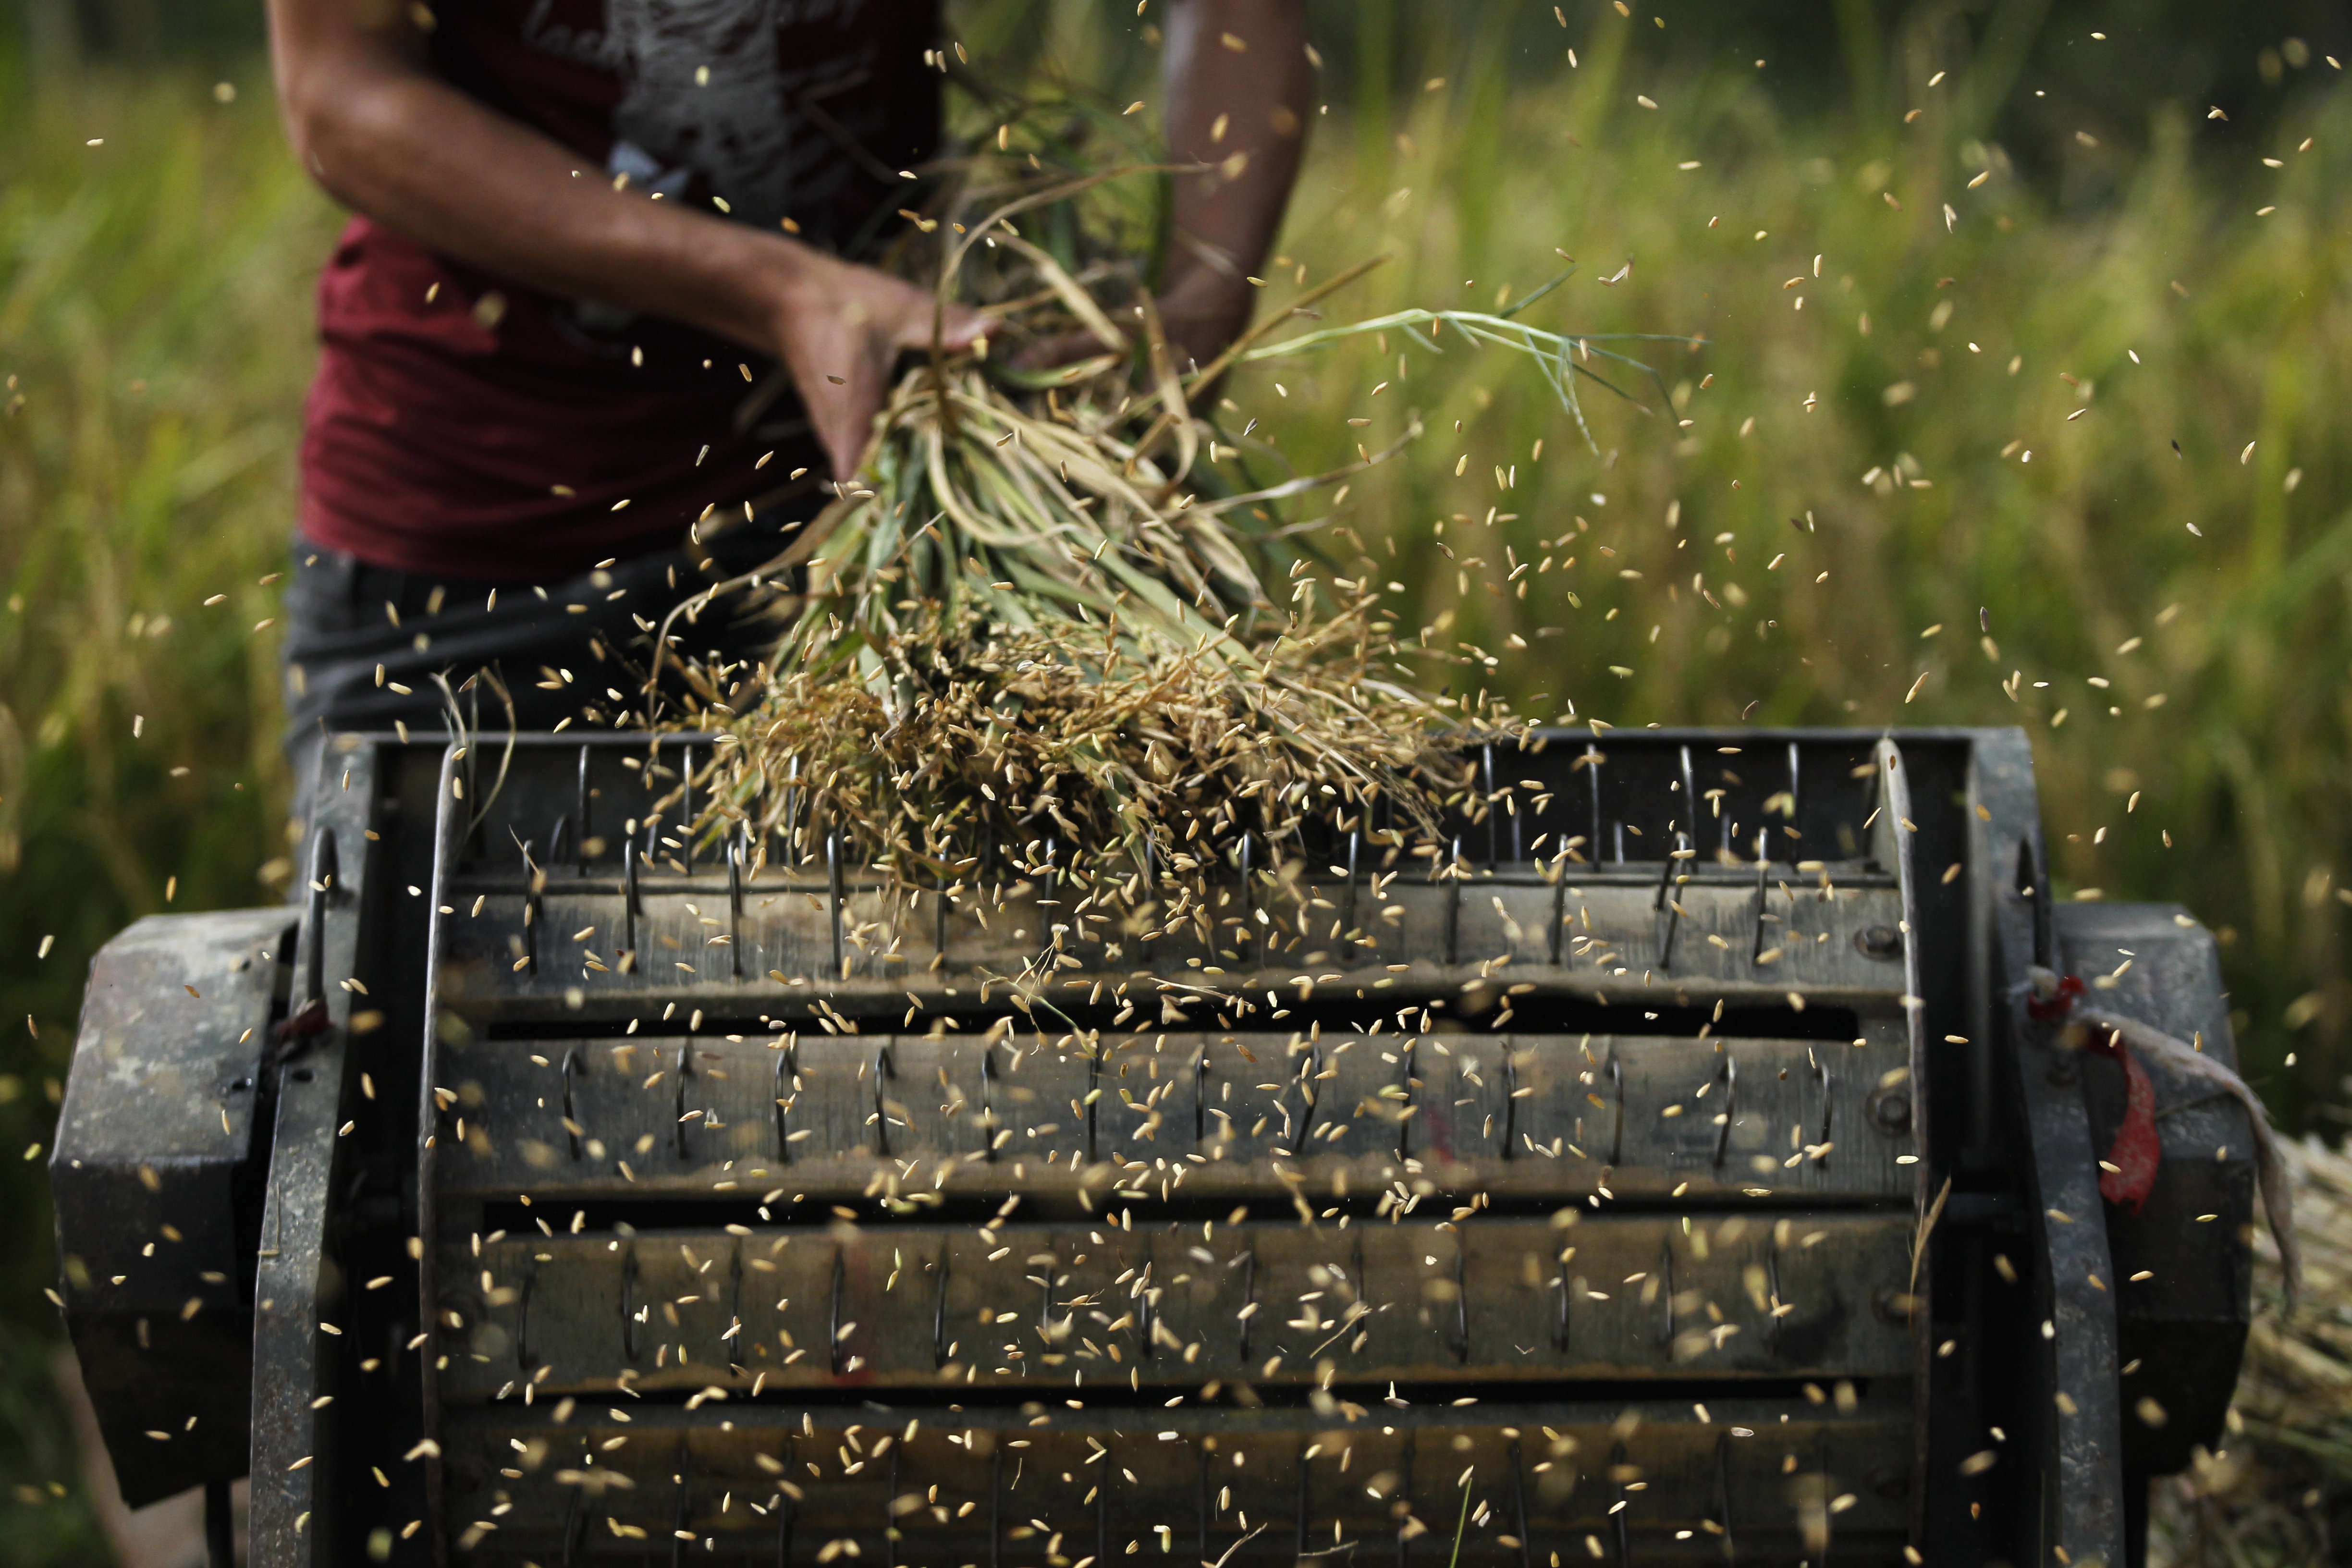 A Nepalese farmer thrashes paddy after harvesting it in Chaukot, Kavre District, Nepal, Monday, Oct. 23, 2017.  Agriculture is the main source of food, income, and employment for the majority of people in Nepal. (AP Photo/Niranjan Shrestha)